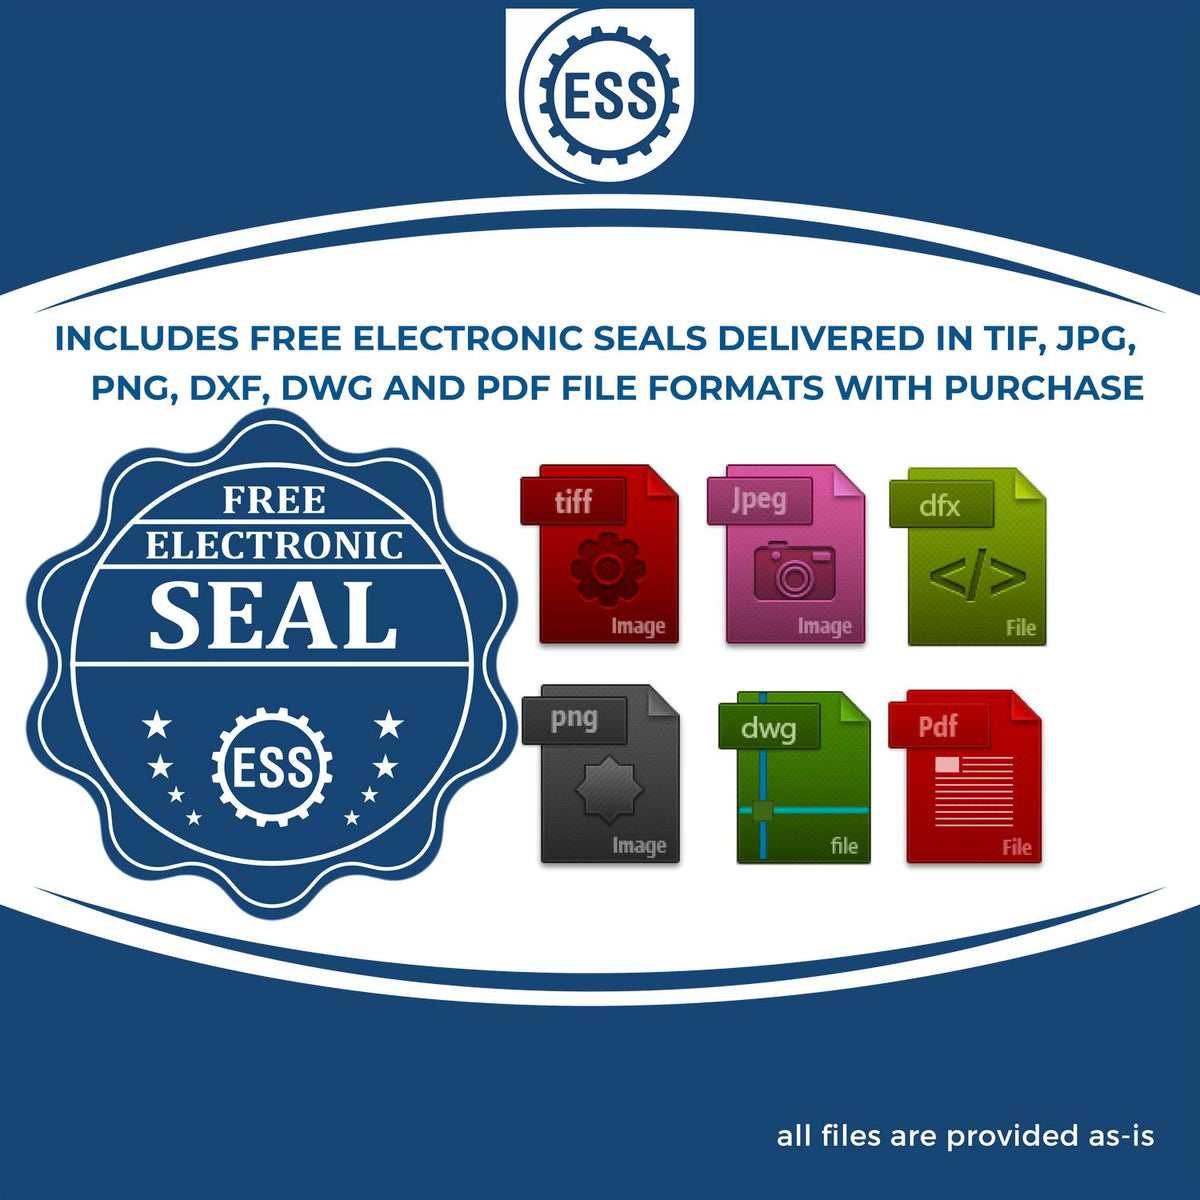 An infographic for the free electronic seal for the Soft Arizona Professional Engineer Seal illustrating the different file type icons such as DXF, DWG, TIF, JPG and PNG.